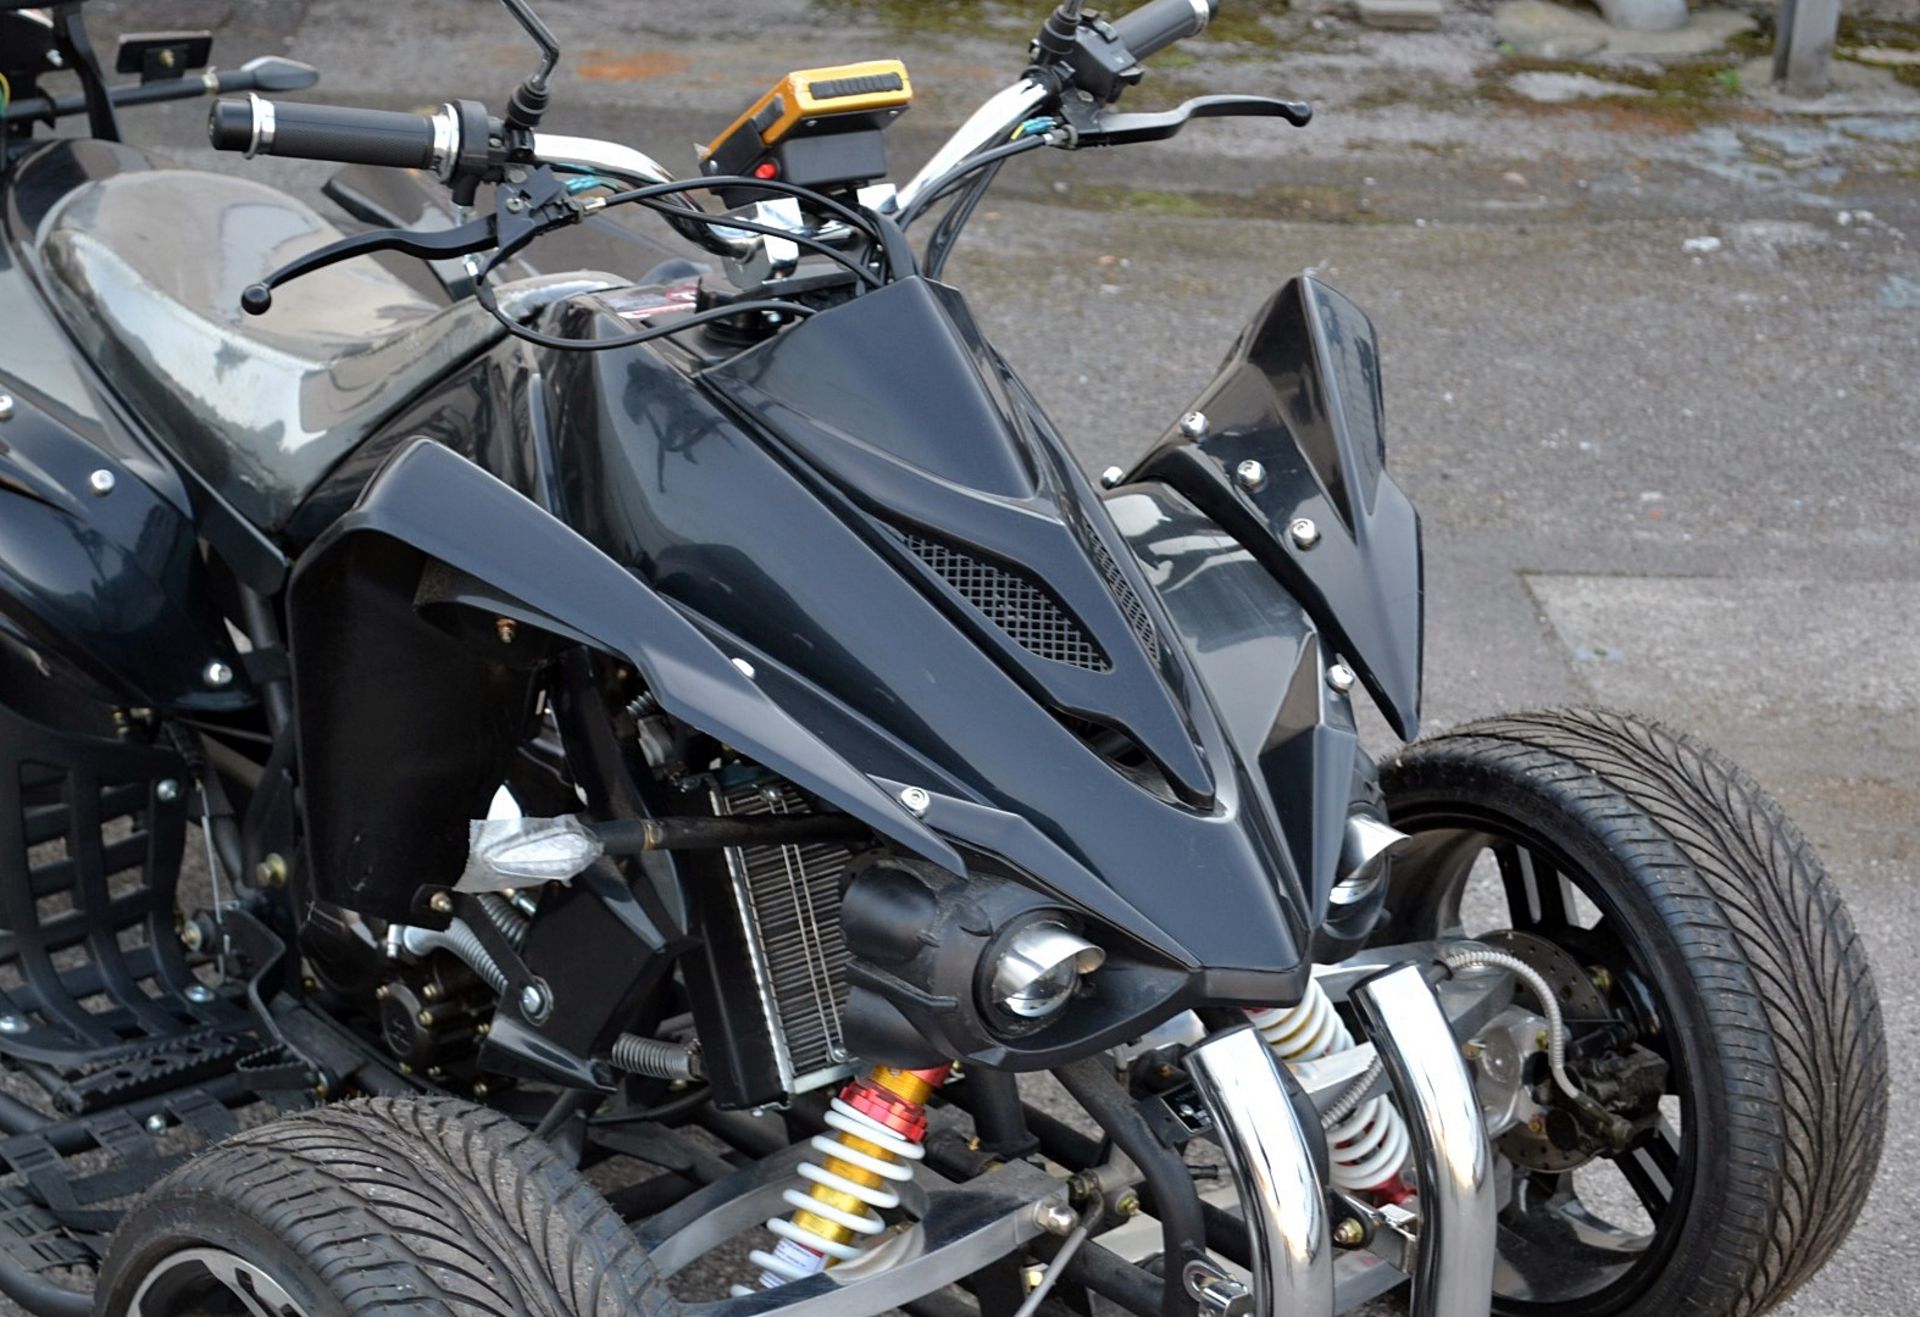 1 x Jinling ATV Adult Quad Bike - 250cc - Colour: Black - Pre-owned In Good Overall Condition With - Image 5 of 22